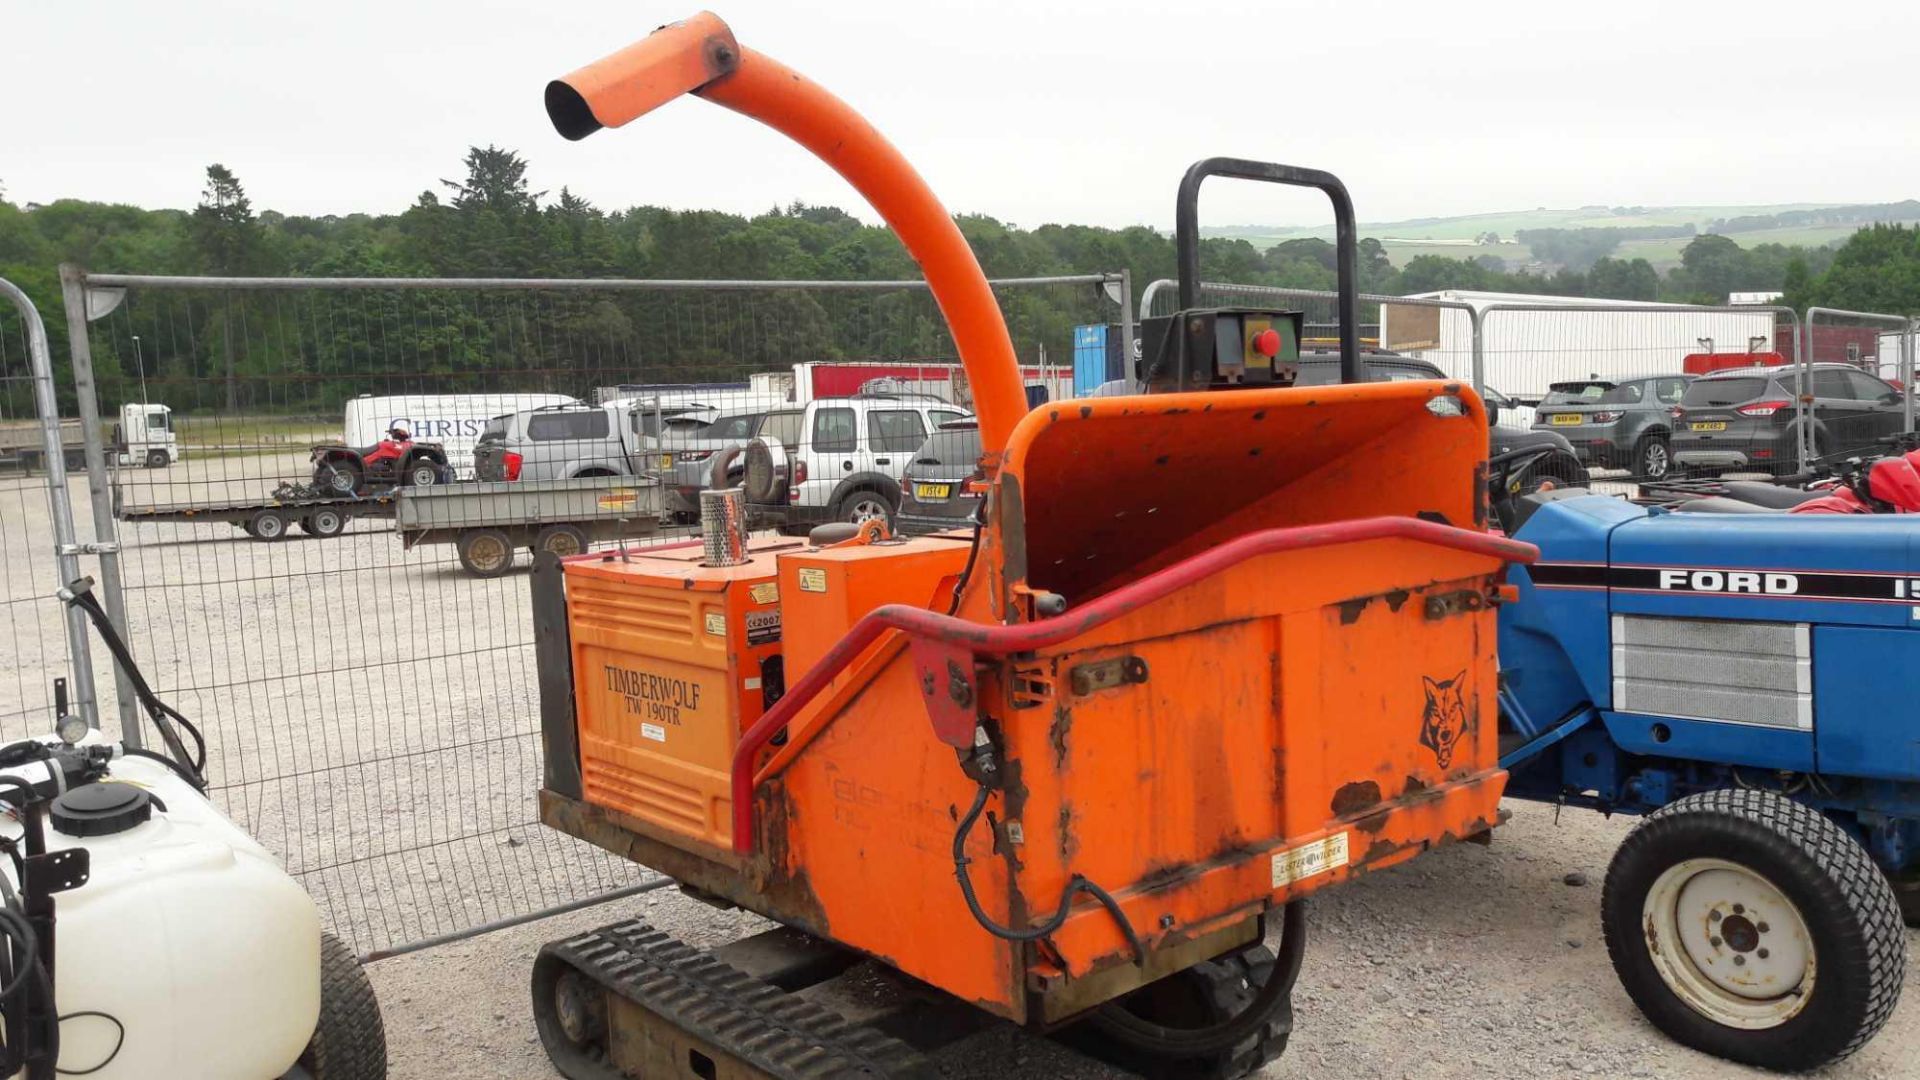 TIMBERWOLF CHIPPER,TW190TR. 2300 HRS APPROX, KEY IN PC